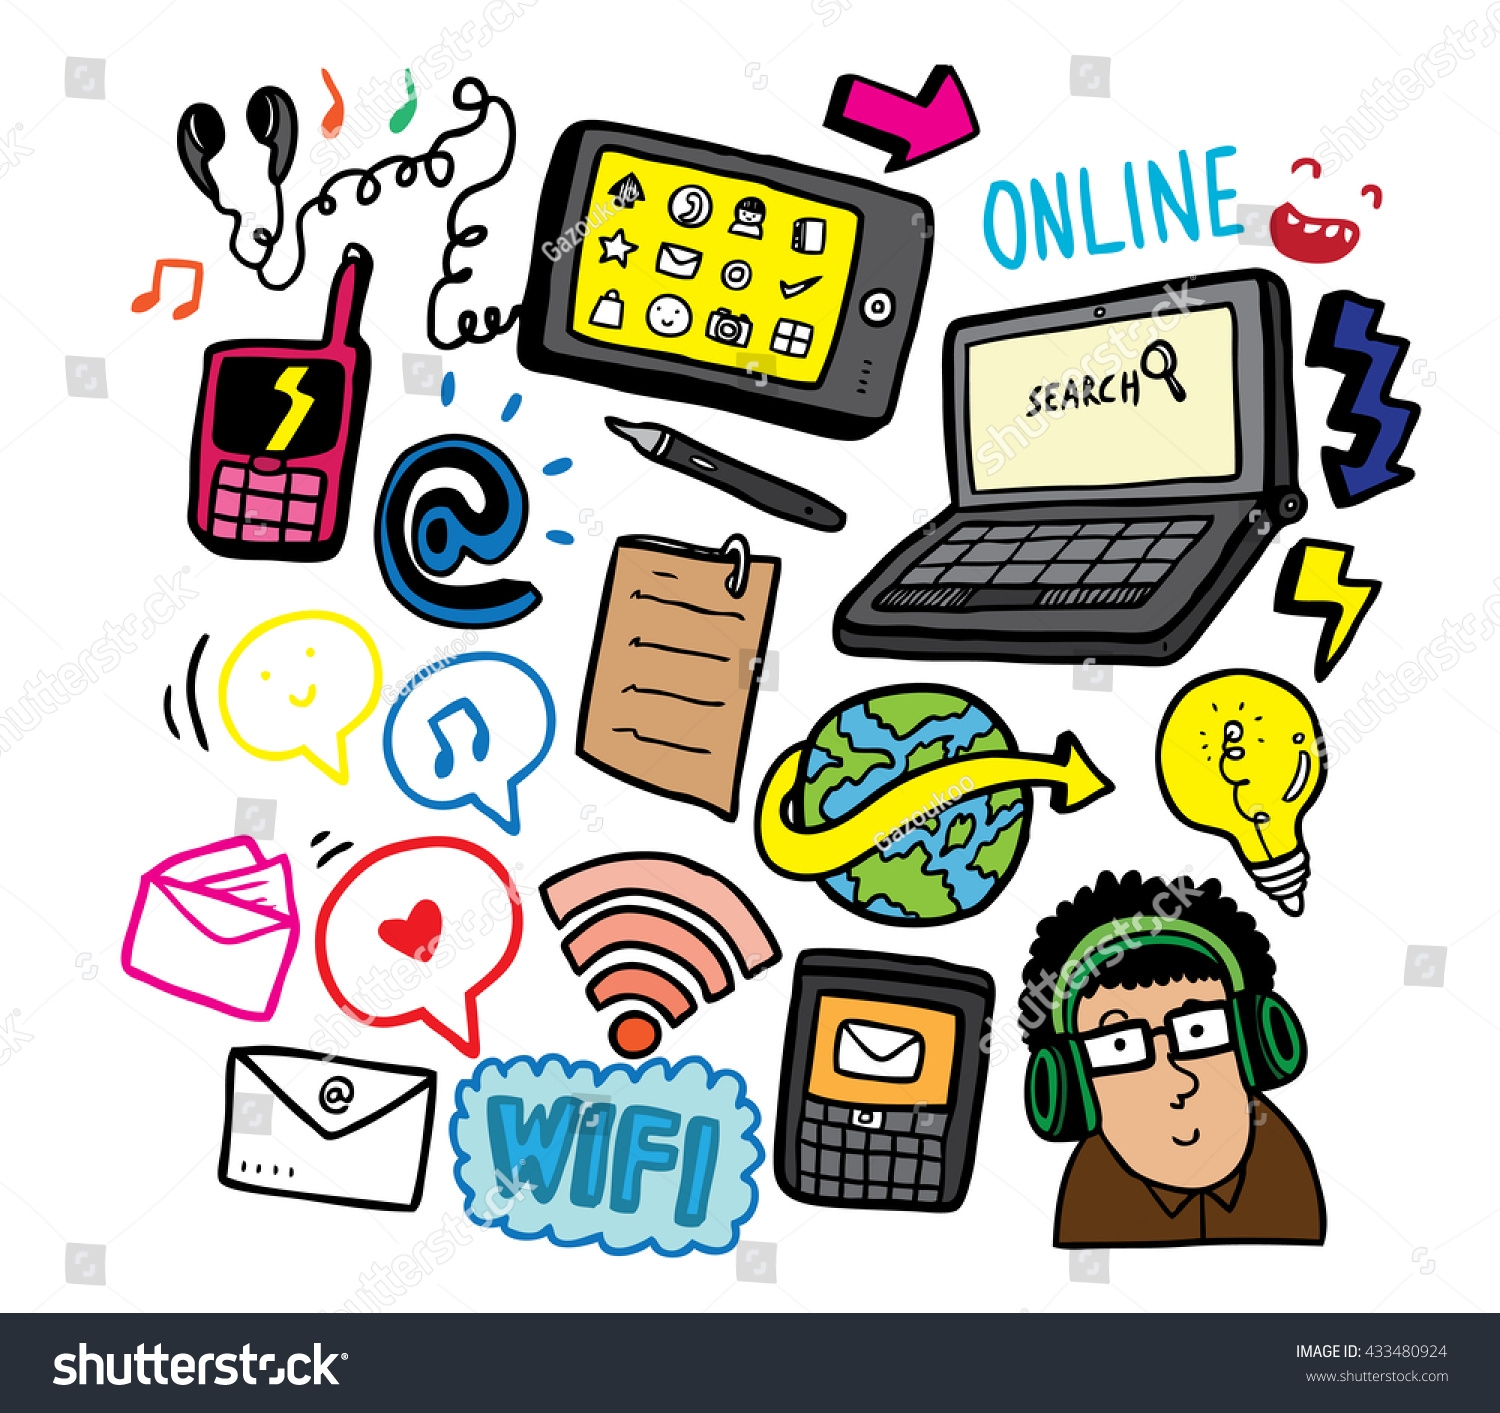 Technology clipart clipart images gallery for free download